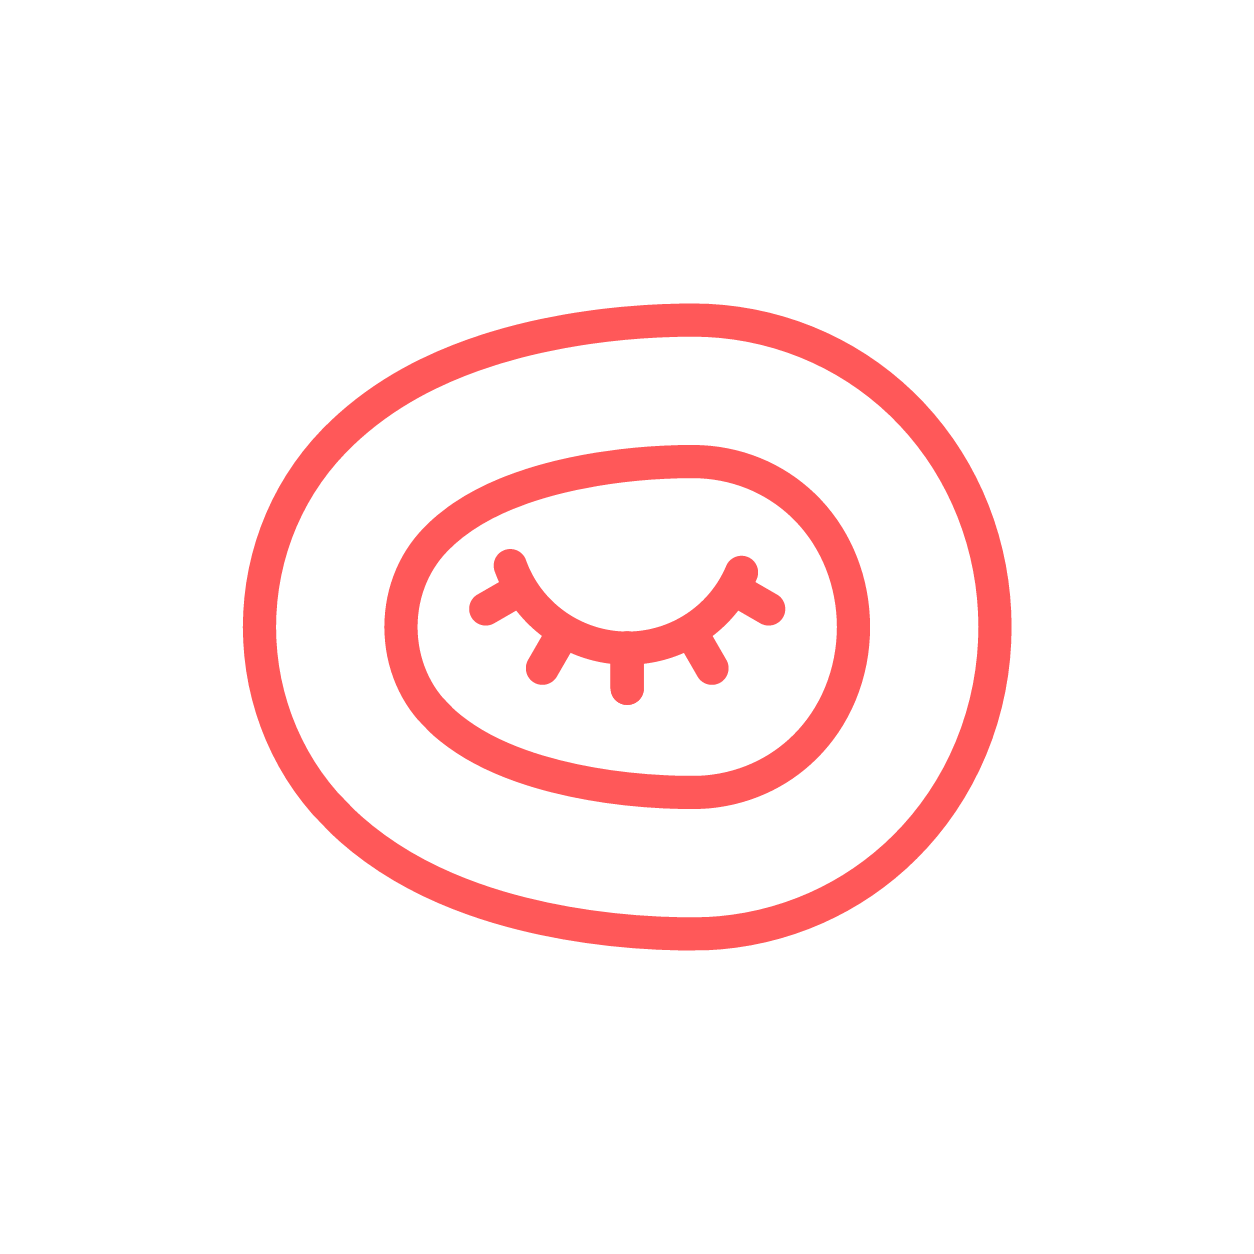 A closed eye surrounded by two ovals to represent eye cups.